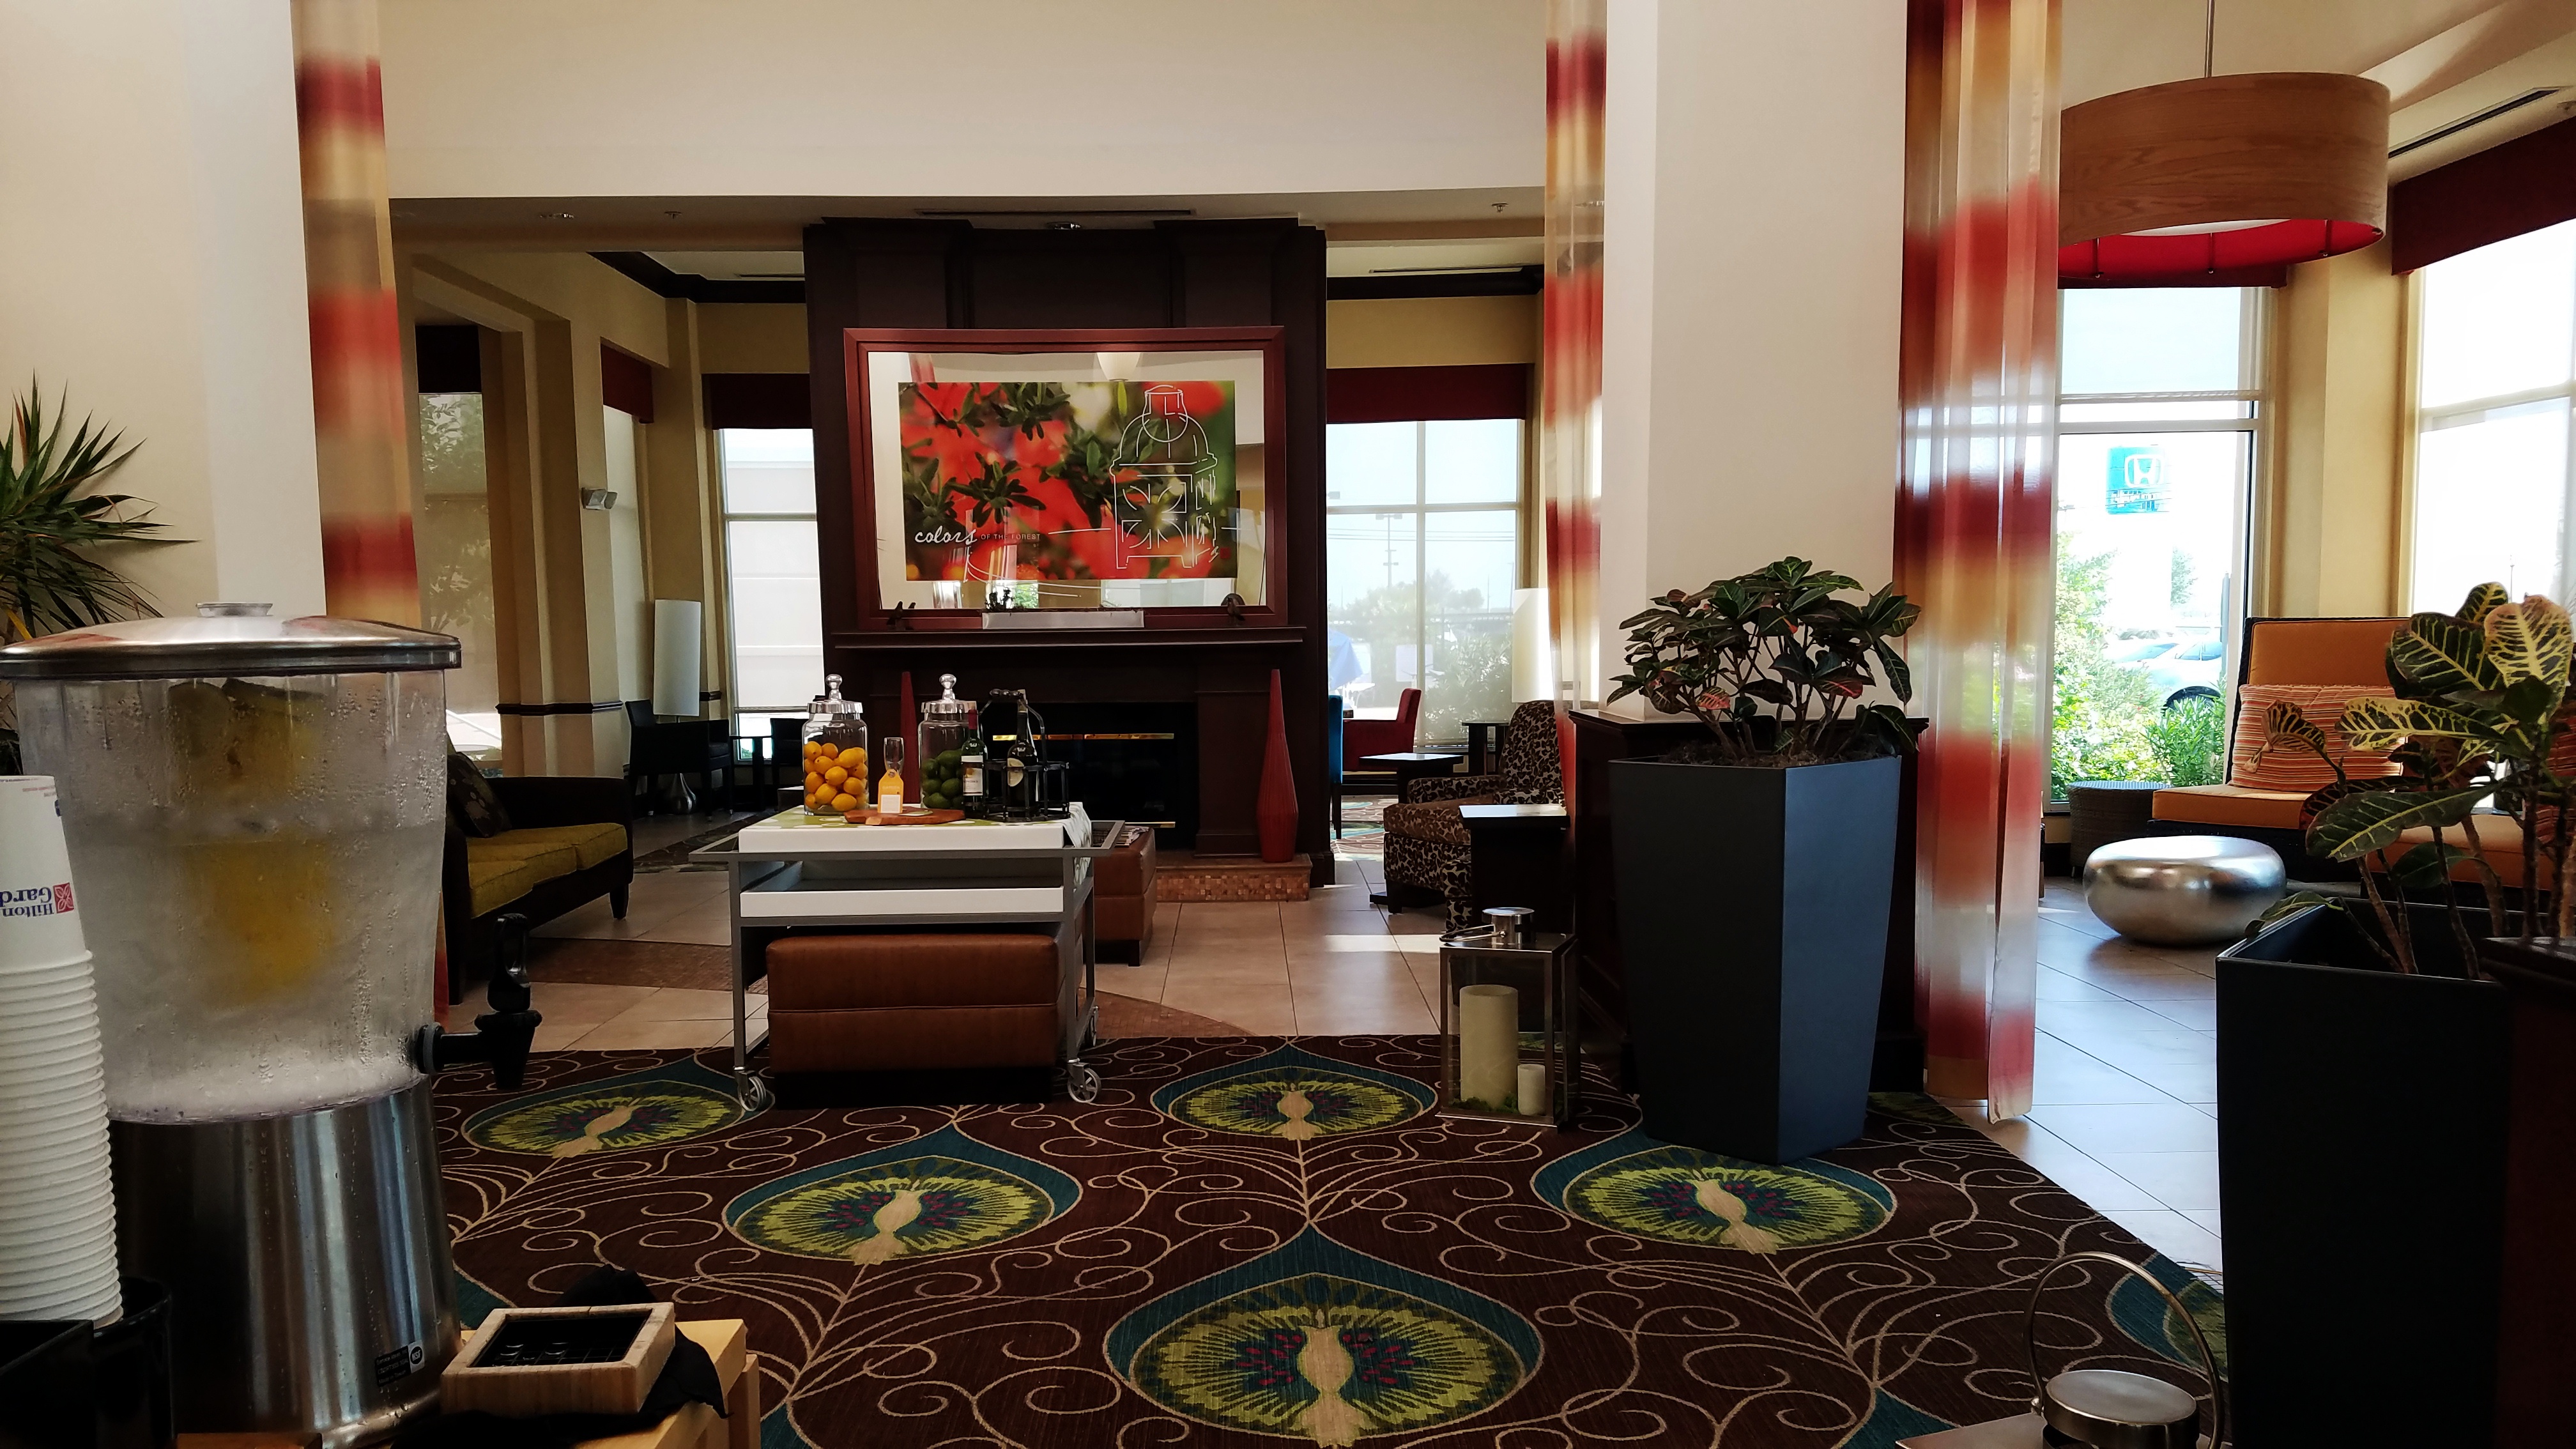 5 Reasons To Stay At The Hilton Garden Inn A Global Lifestyle